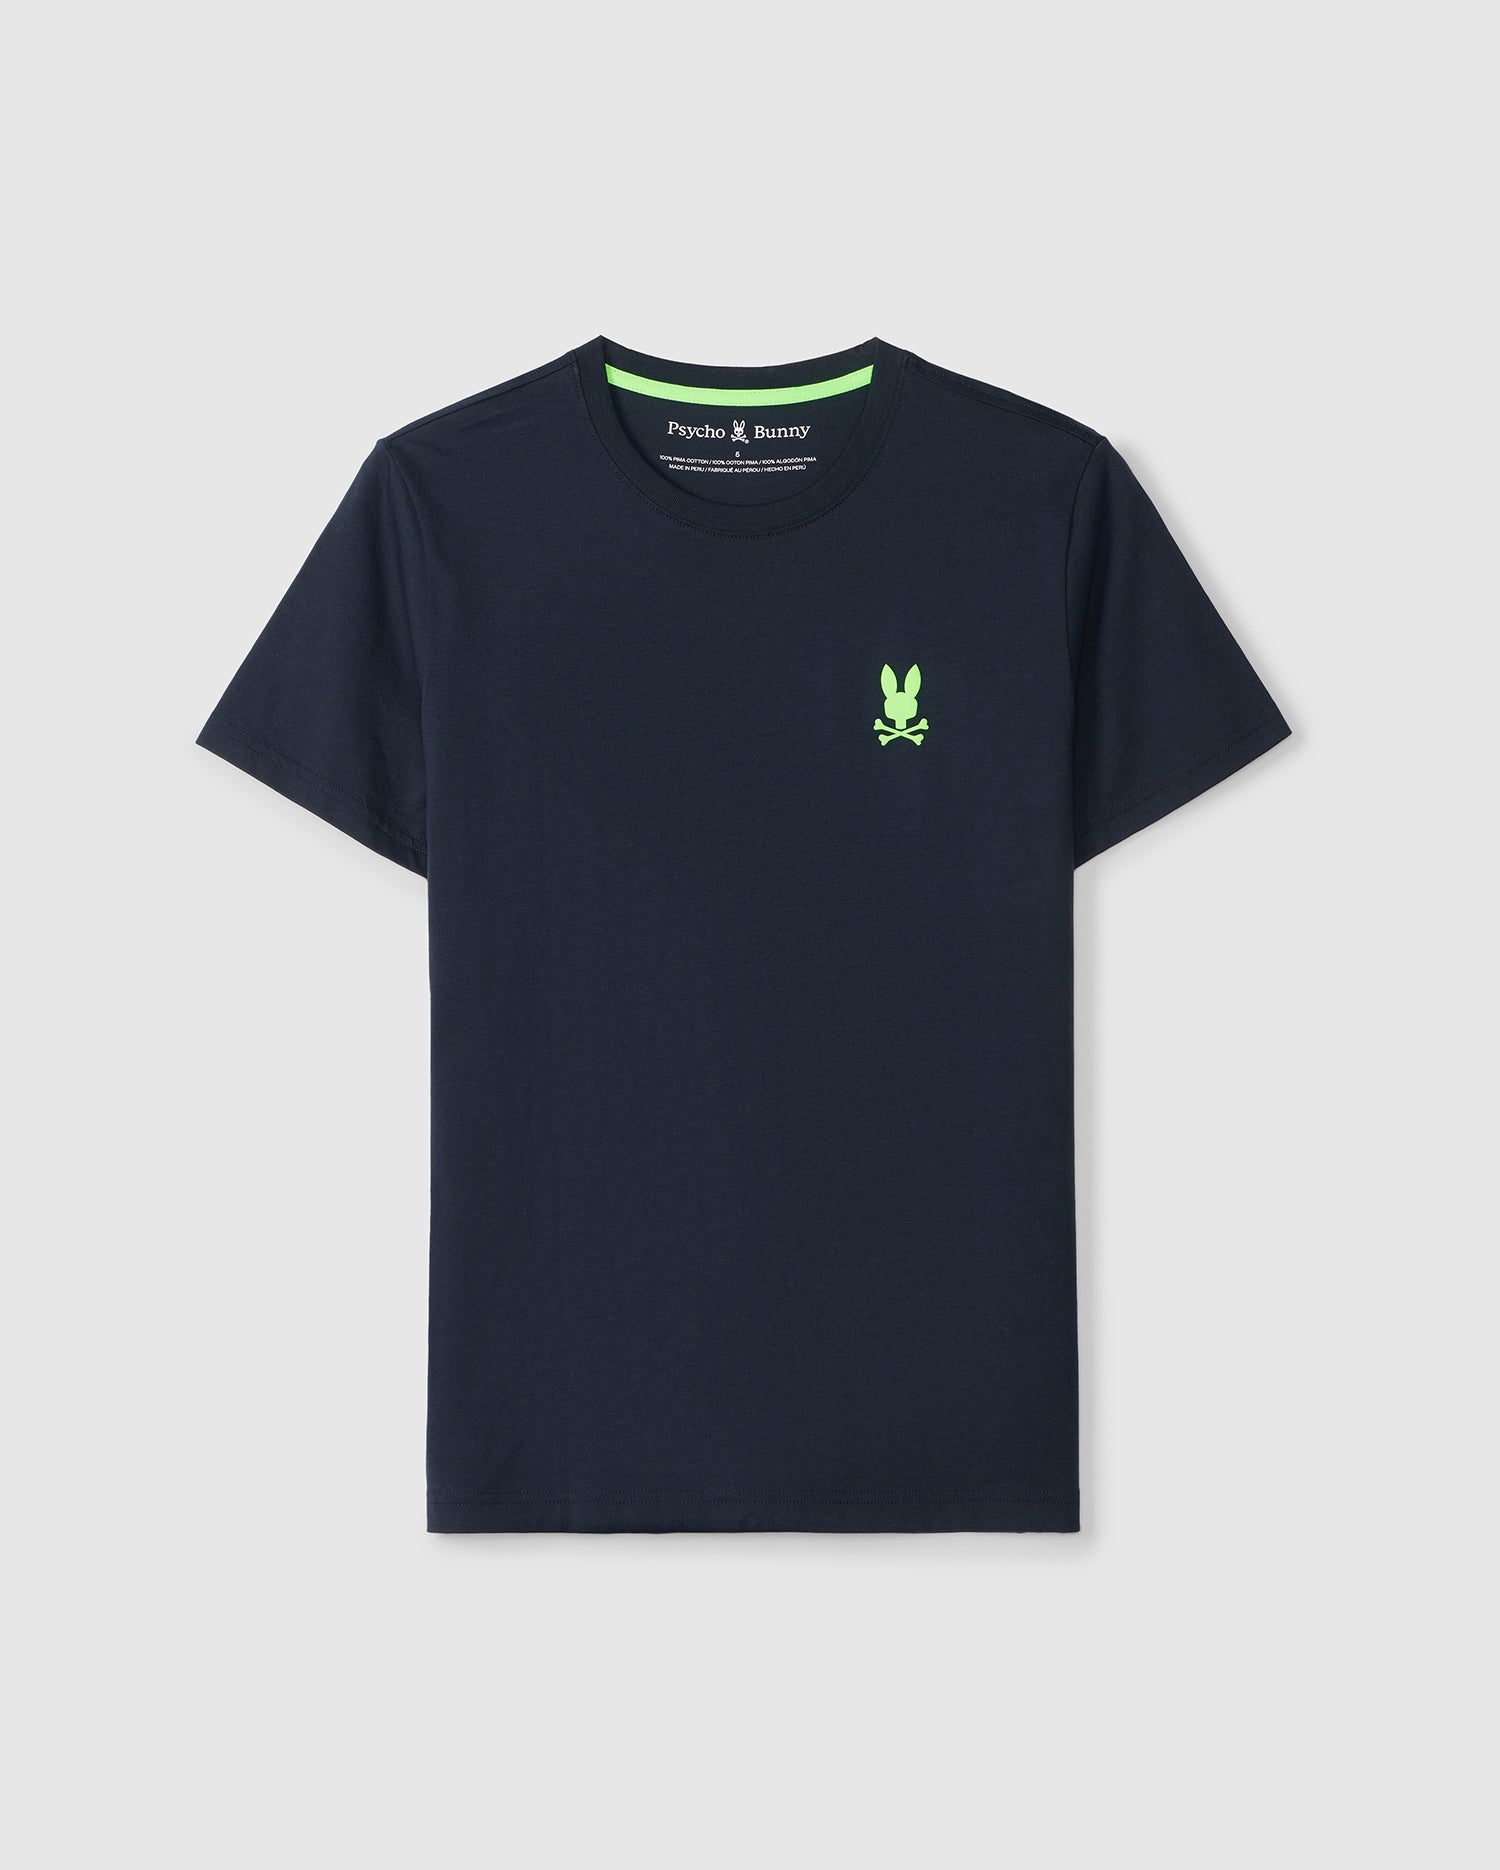 A navy blue Pima cotton tee with short sleeves, featuring a small green bunny skull and crossbones graphic on the left chest. The neckline is rounded, and the shirt boasts a simple, clean design. The Psycho Bunny label is visible inside the collar. This is the MENS SLOAN BACK GRAPHIC TEE - B6U214B2TS.